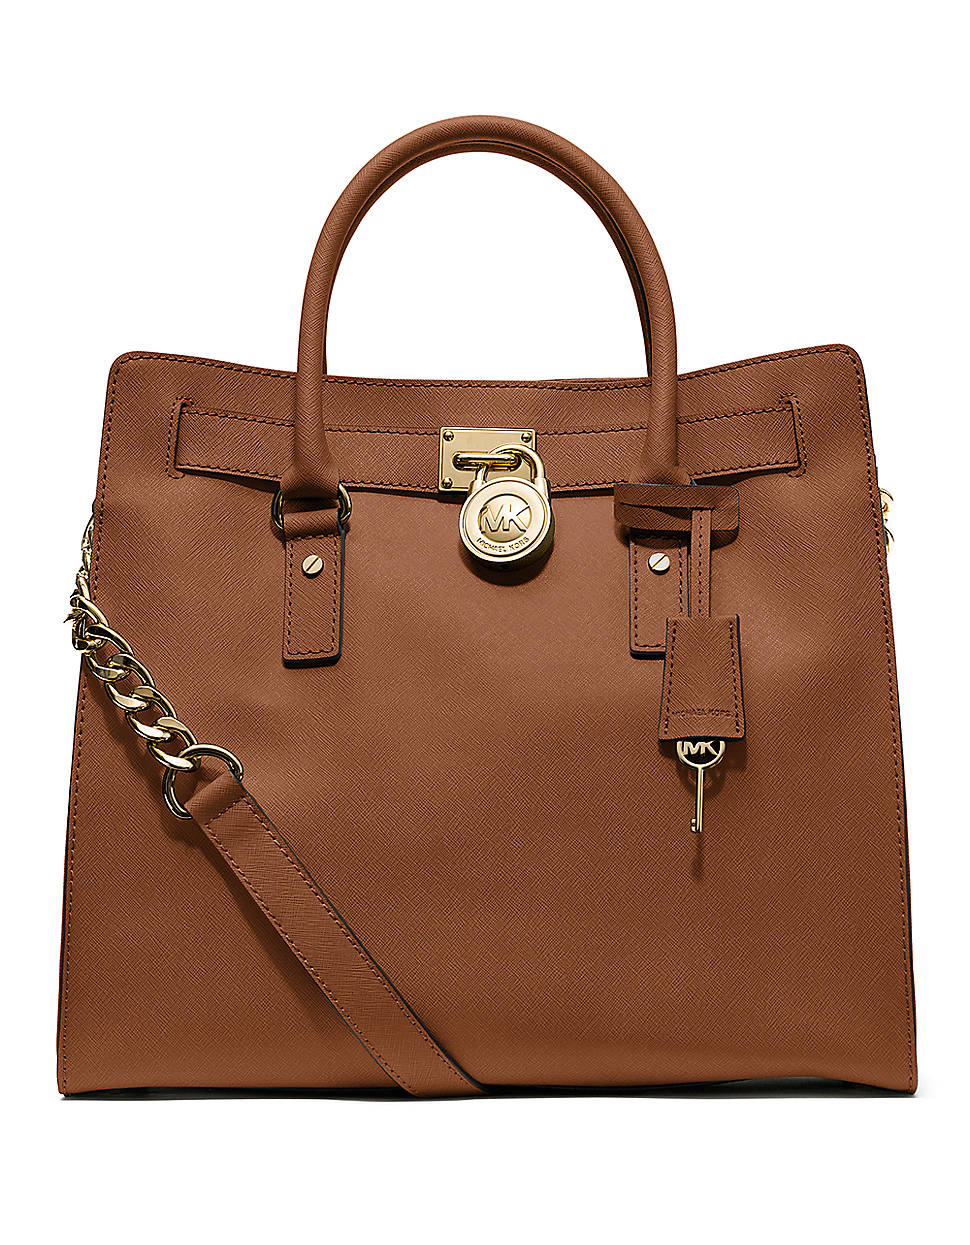 Michael Michael Kors Hamilton Large Leather Tote Bag in Brown (luggage) | Lyst